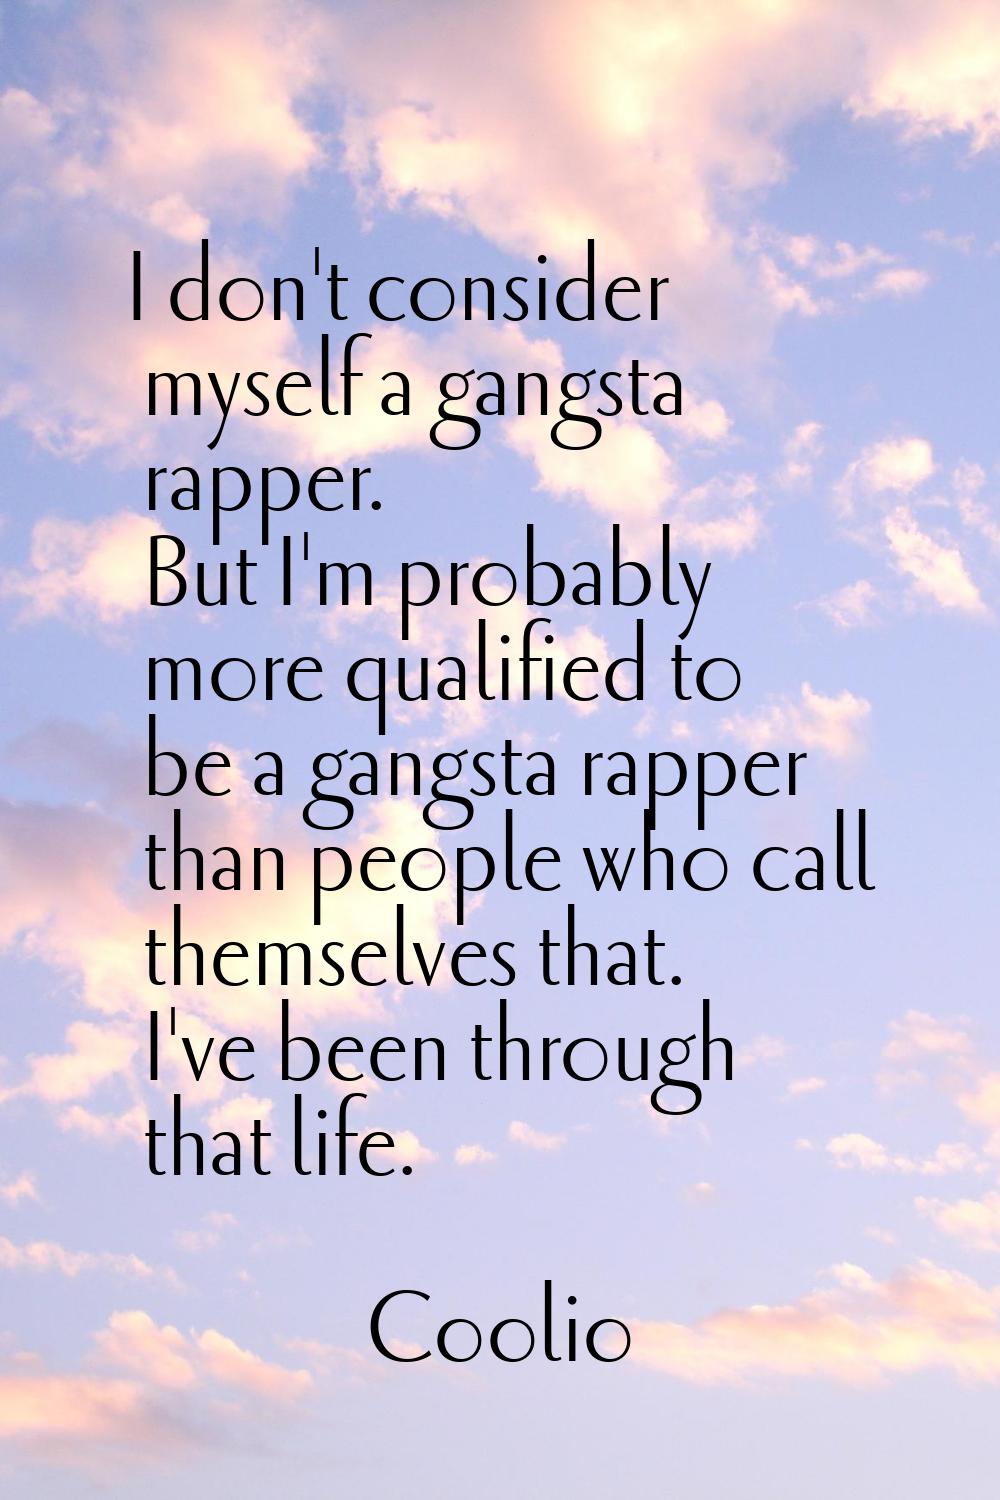 I don't consider myself a gangsta rapper. But I'm probably more qualified to be a gangsta rapper th